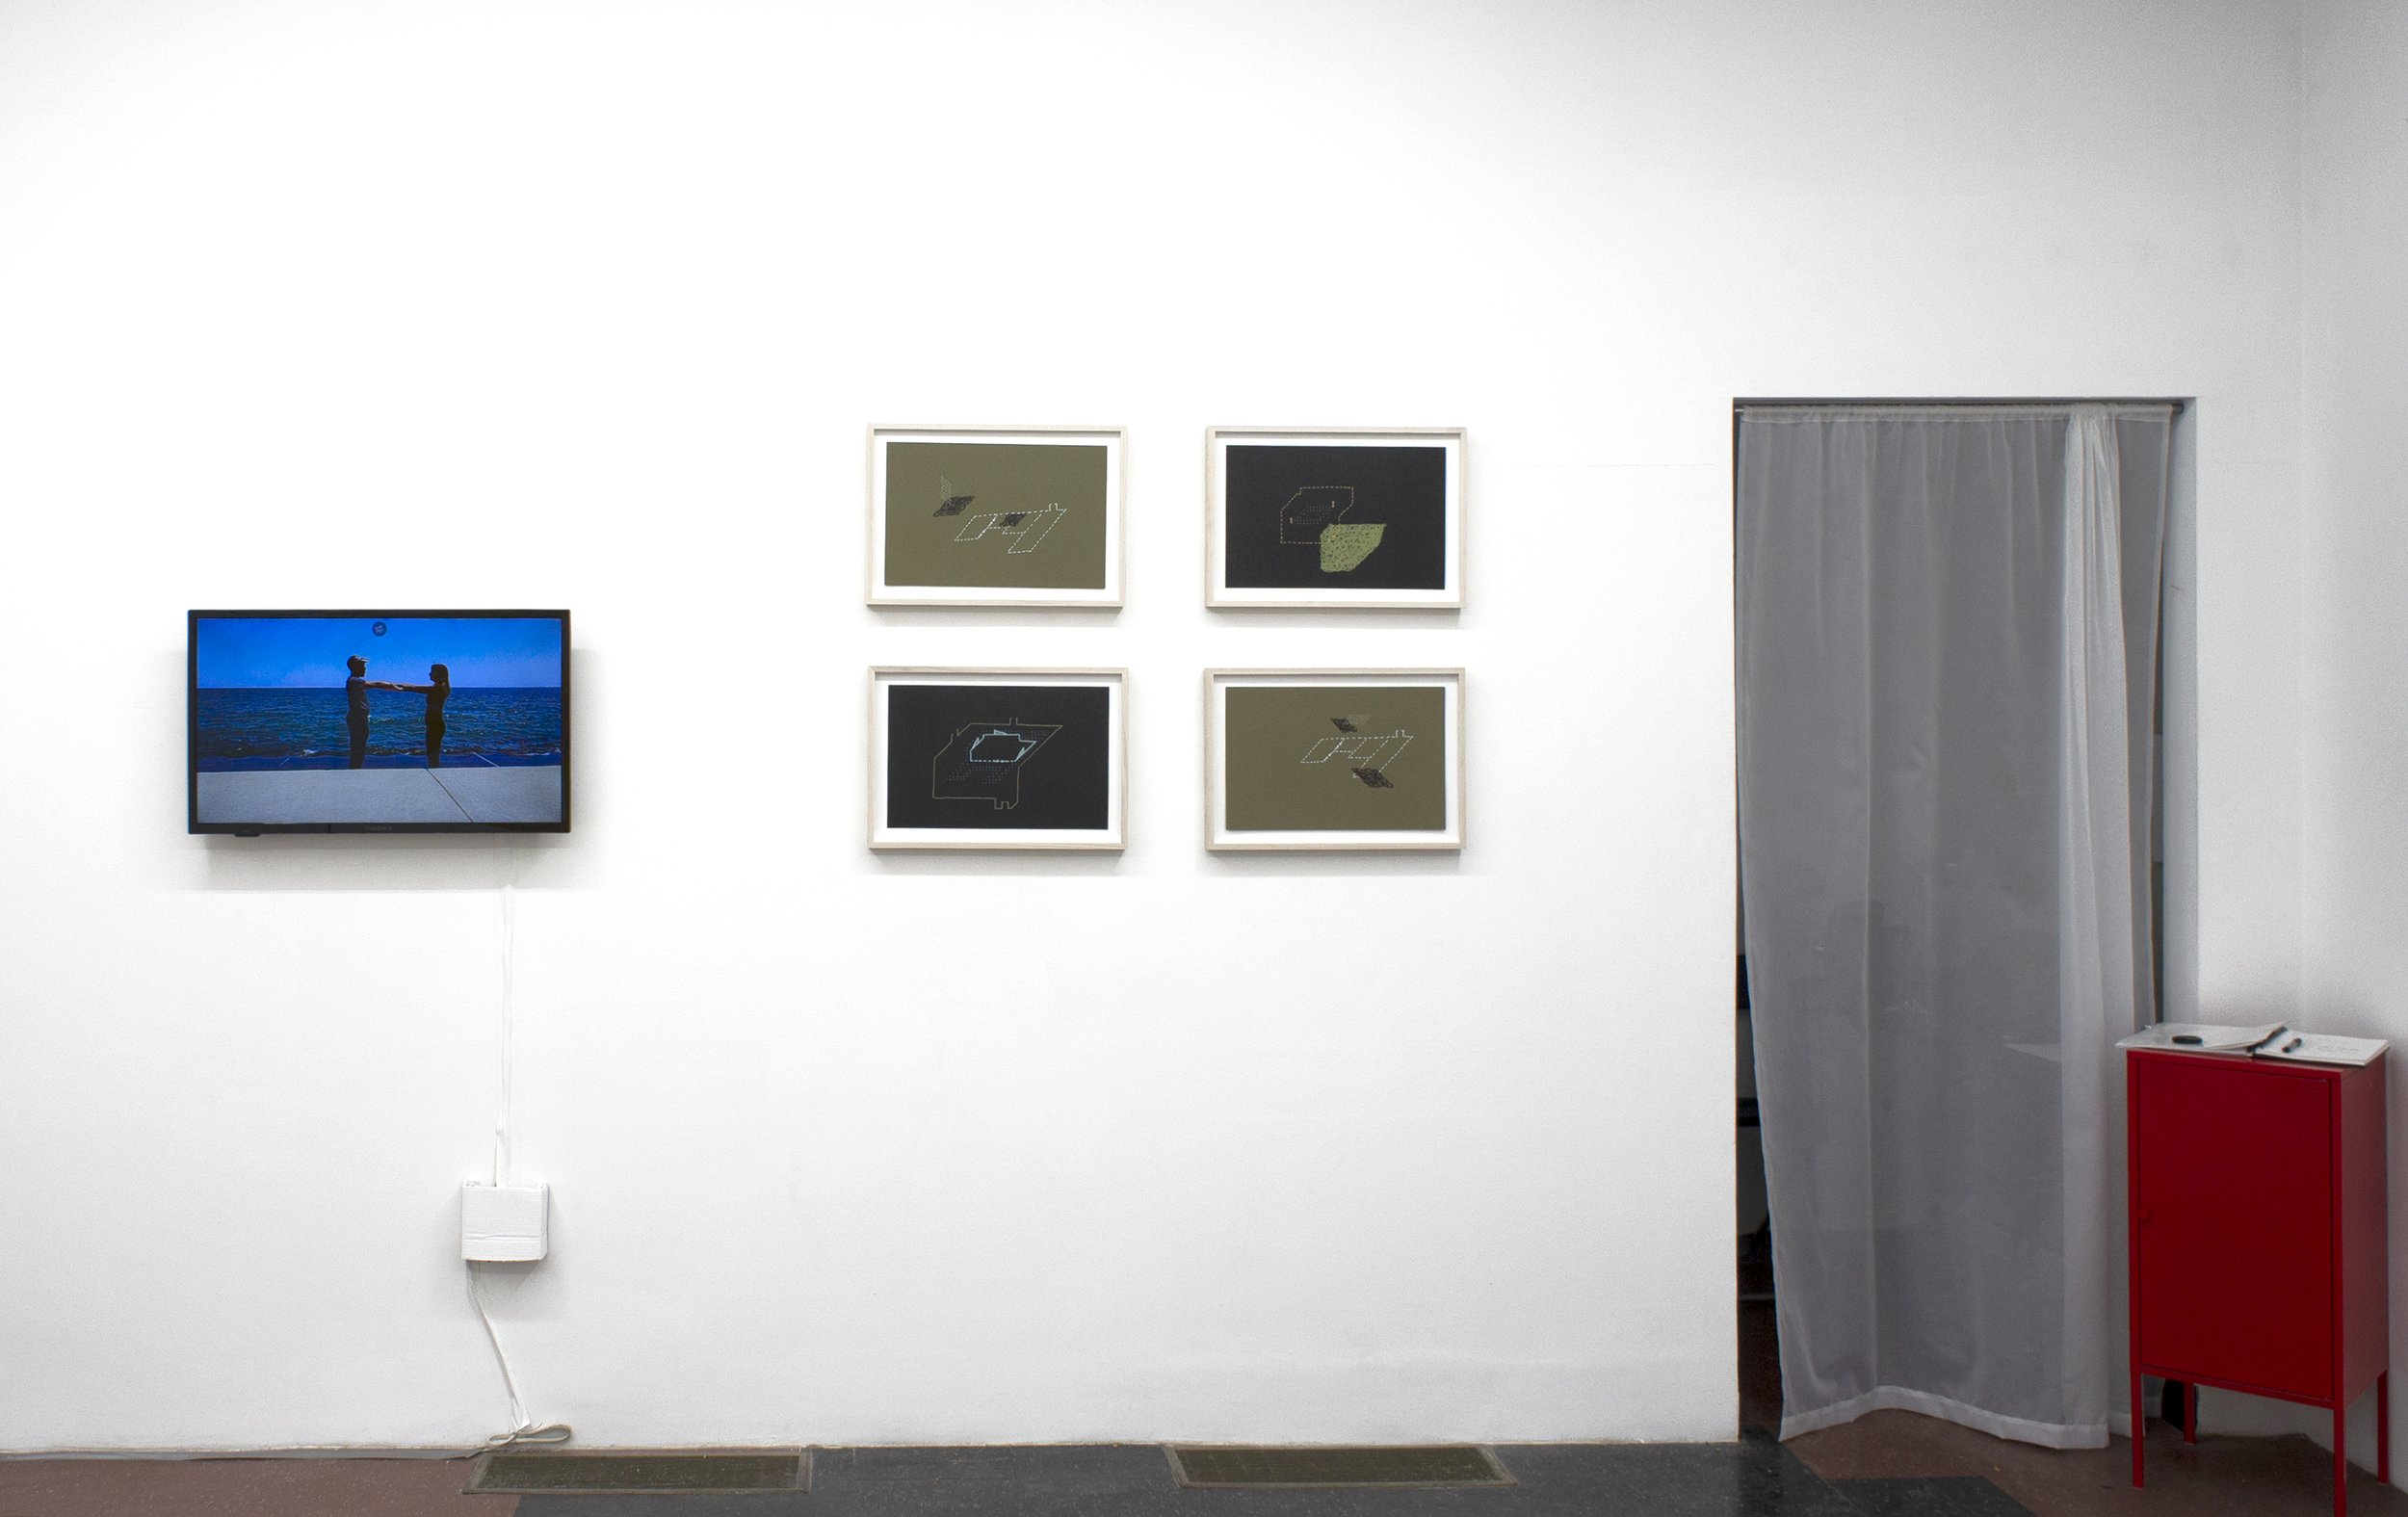  Installation view of framed prints and  video  at Adds Donna.  Lost Intimacies  was group exhibition curated by Pia Singh. Read Exhibition essay  here.  